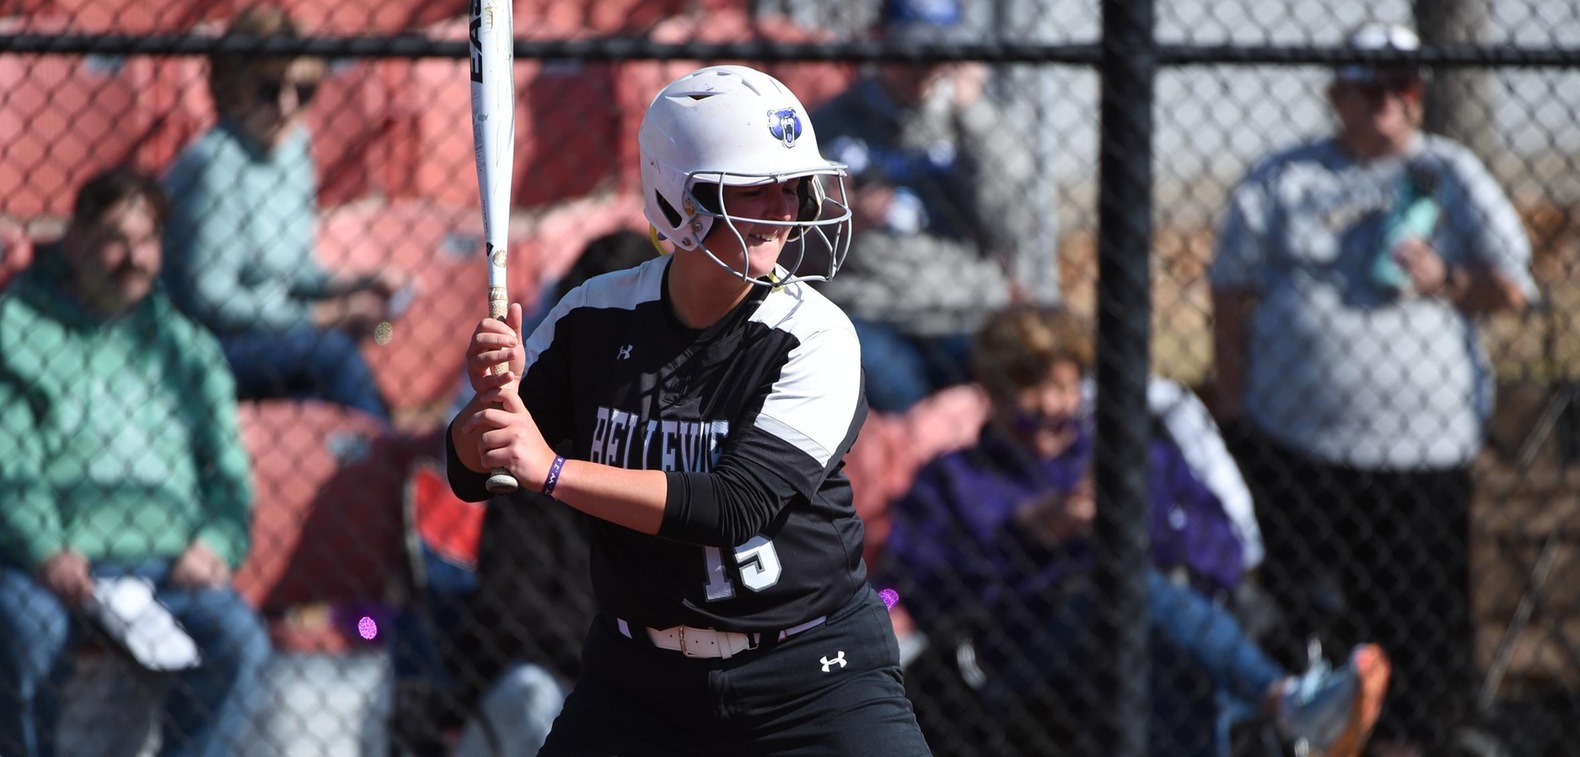 Madison Machacek drove in three runs, including a two-run homer in the bottom of the second.